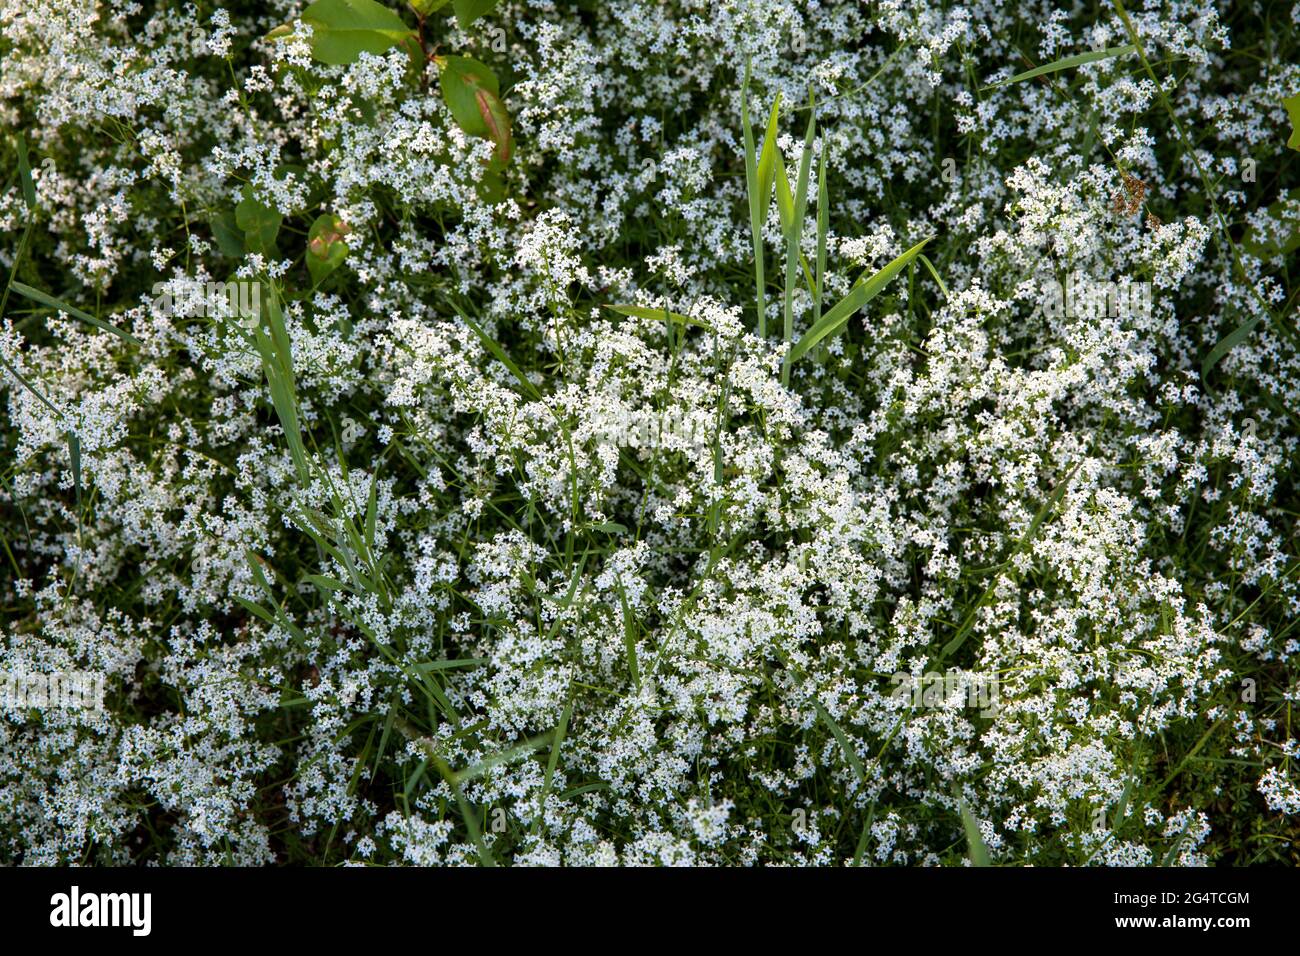 flowering bedstraw in the Pionierbecken 2 in the Koenigsforest near Cologne, North Rhine-Westphalia, Germany. The Pionierbecken (pioneer ponds) are fo Stock Photo